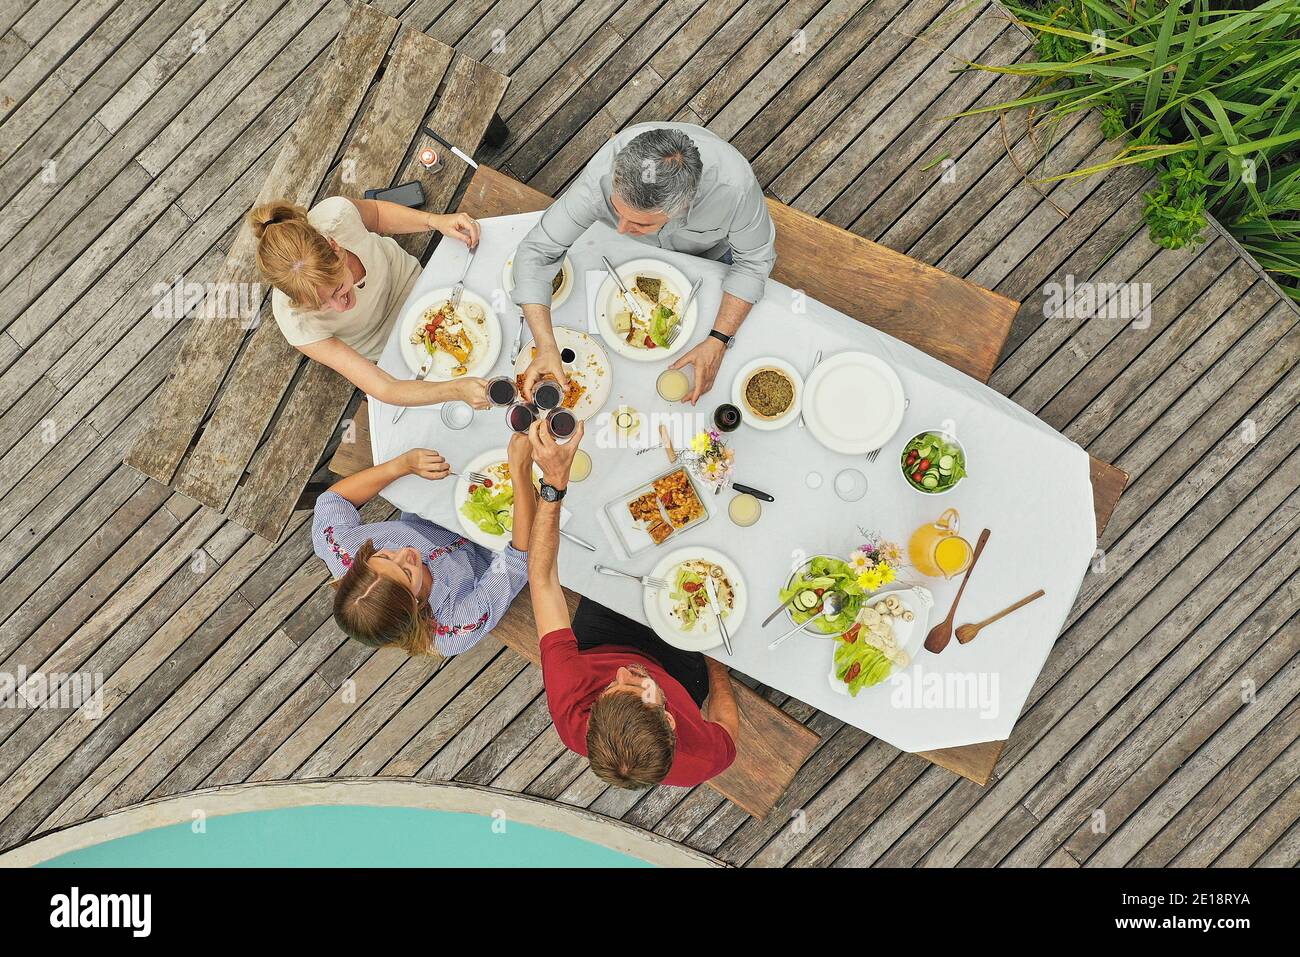 Family having lunch at poolside Stock Photo